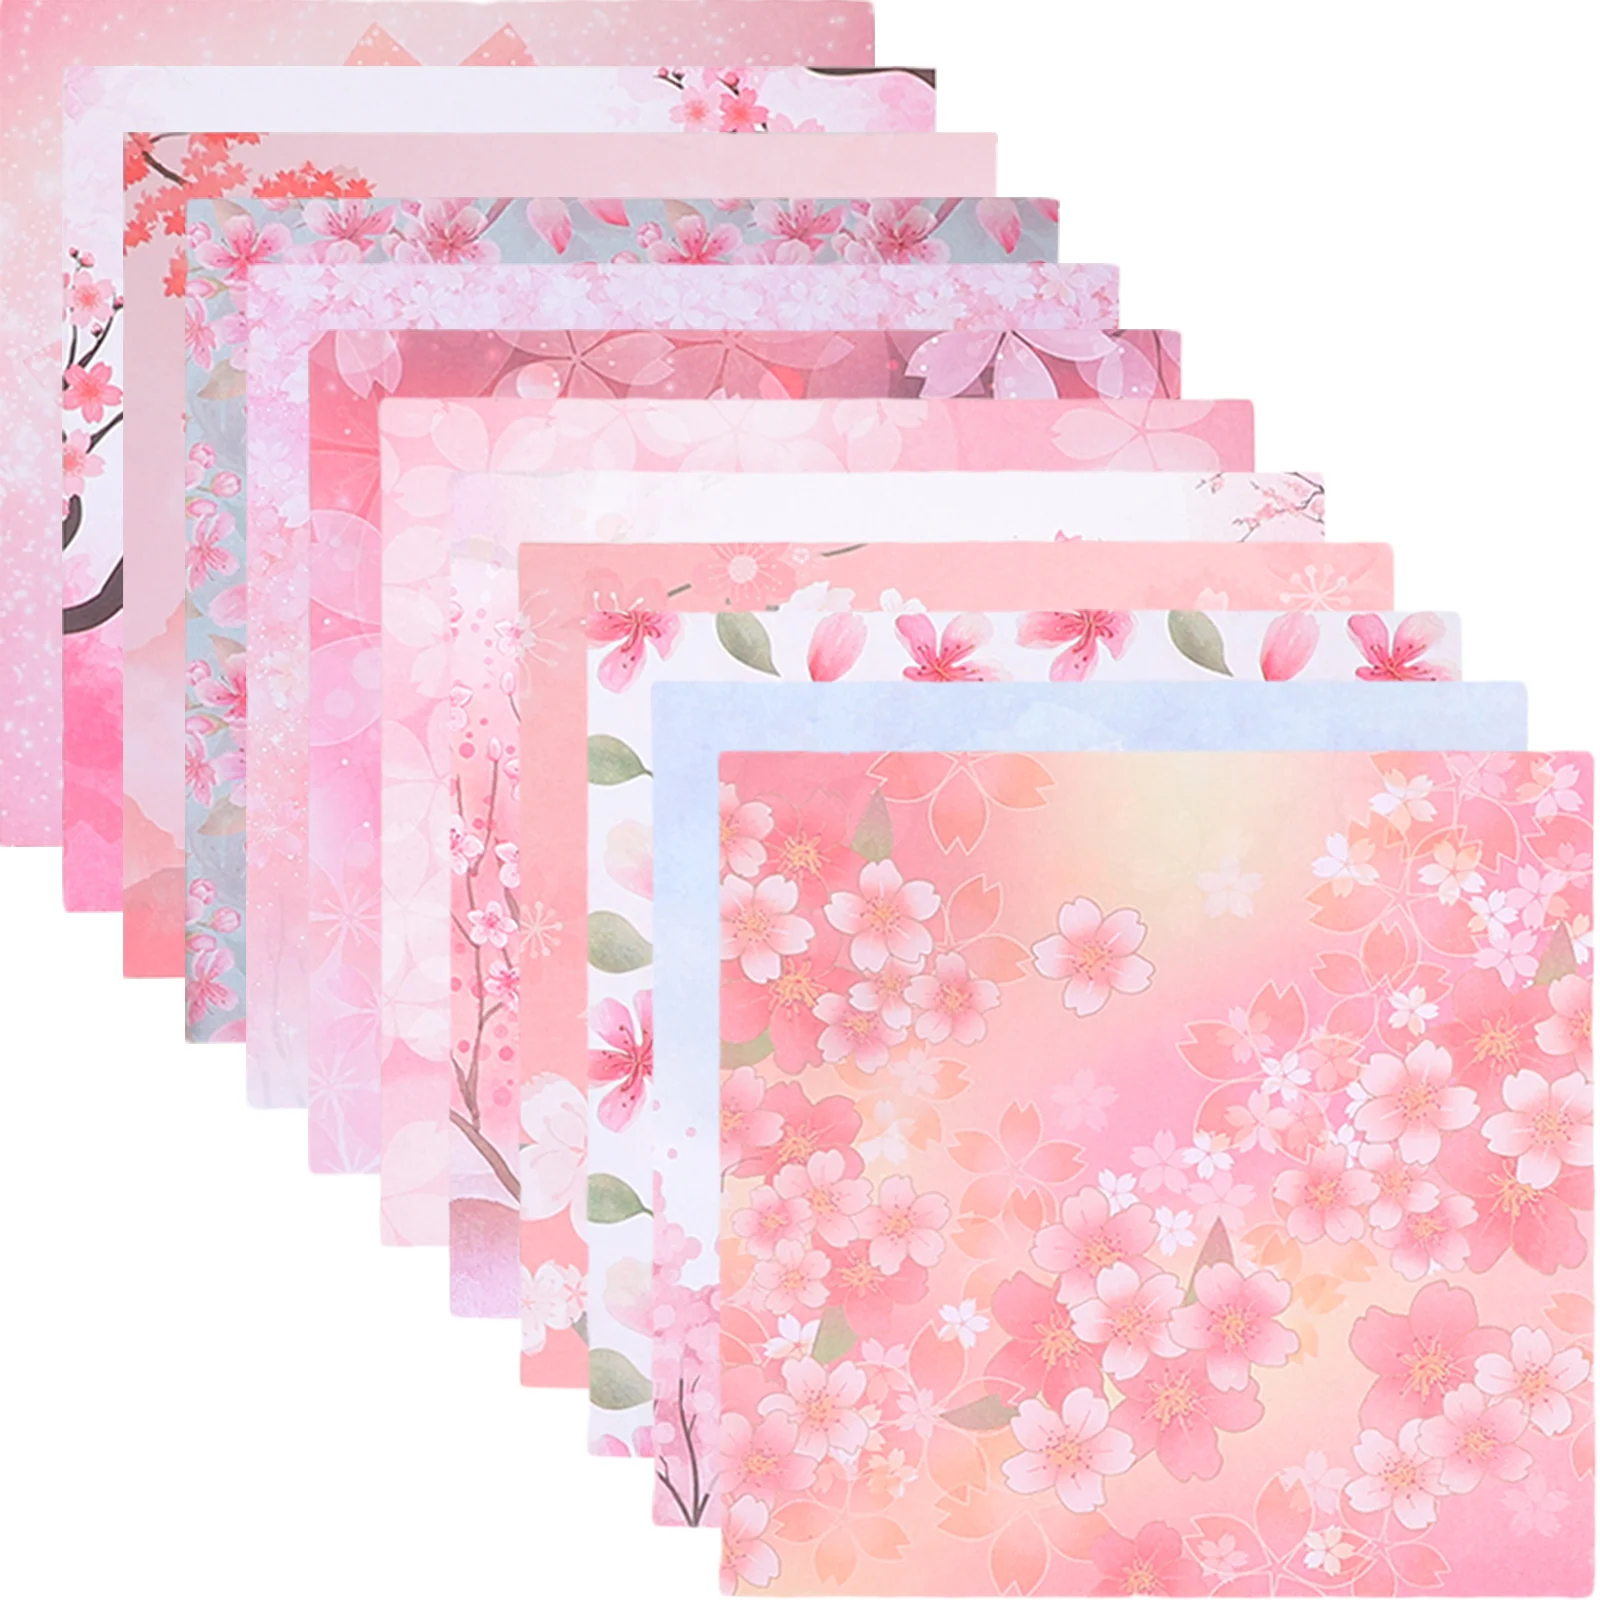 

200 Pcs Cherry Blossoms Origami Child Crafts Kids Paper DIY Folding Papers